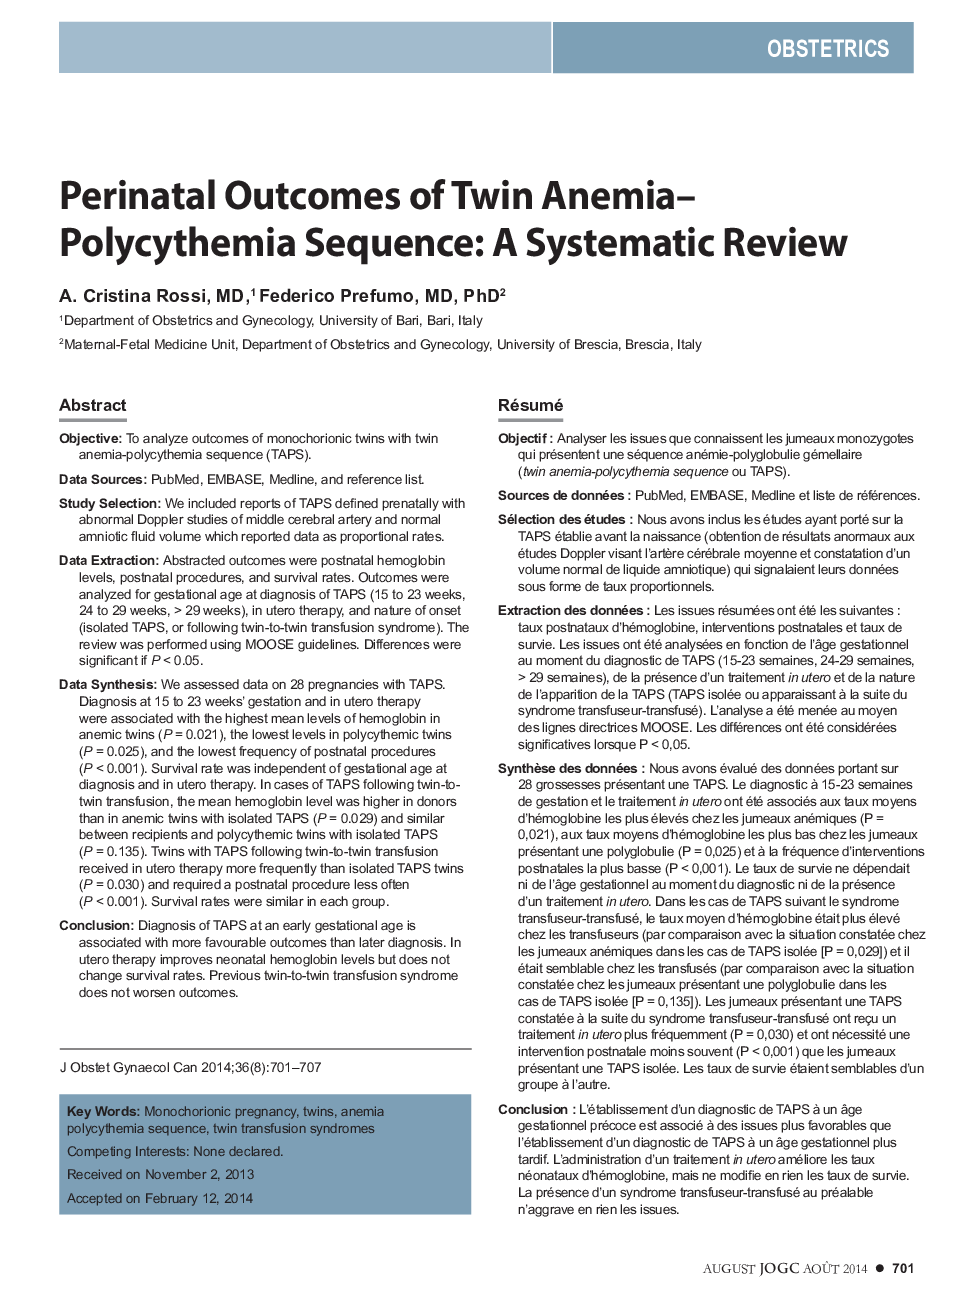 Perinatal Outcomes of Twin Anemia-Polycythemia Sequence: A Systematic Review